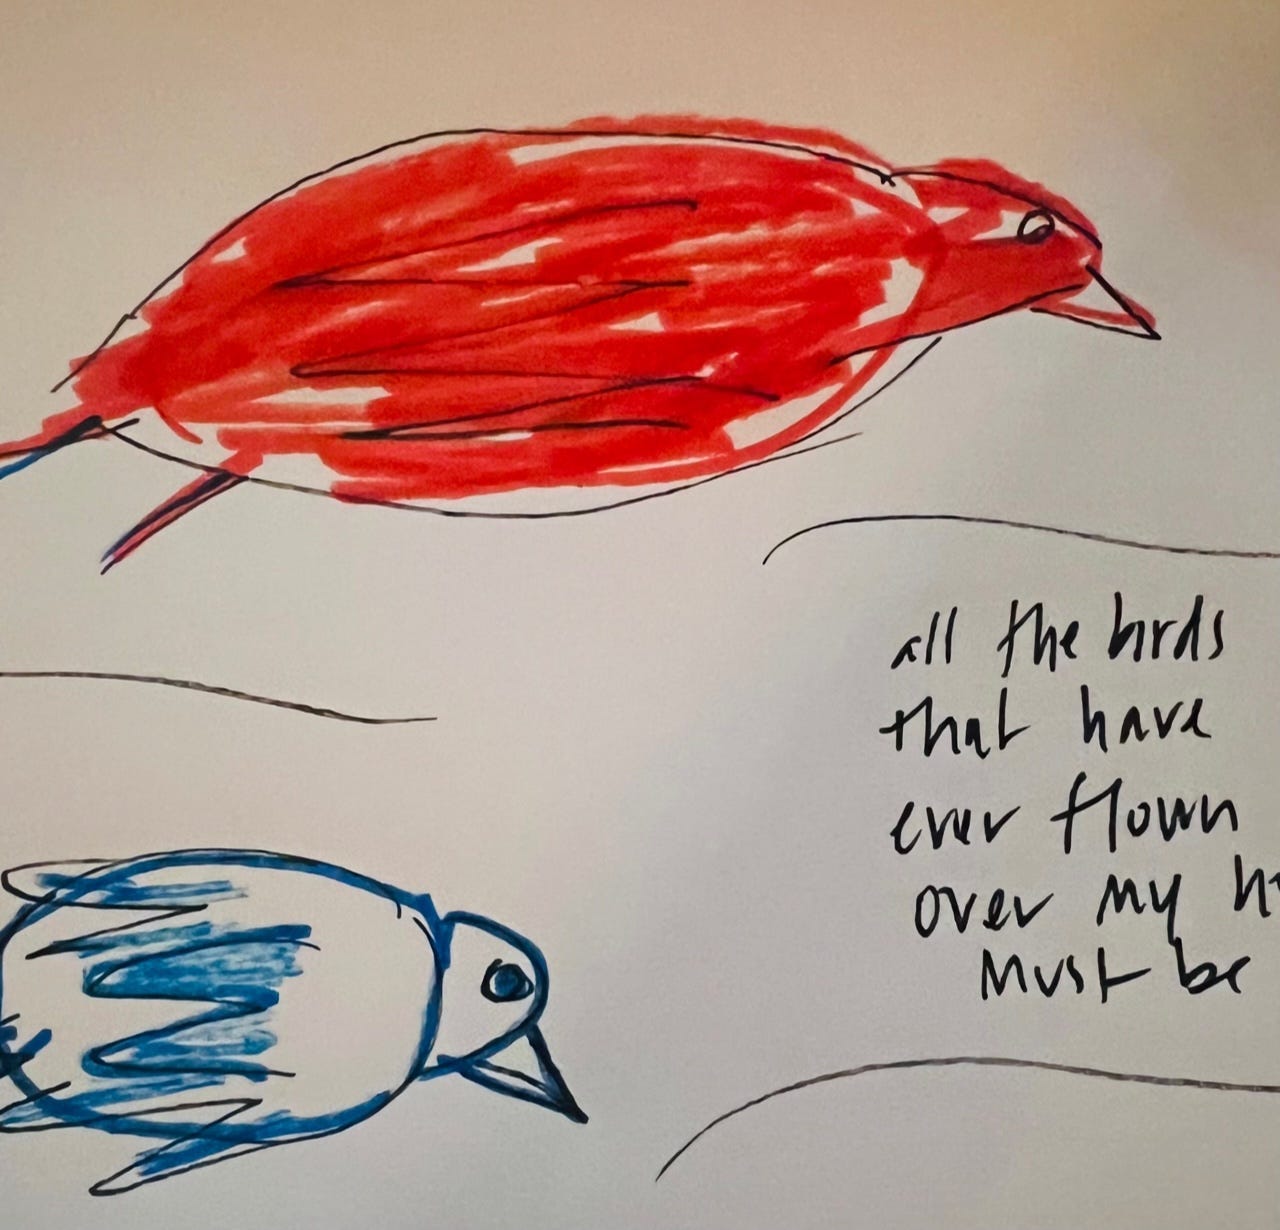 A drawing of birds and a note

Description automatically generated